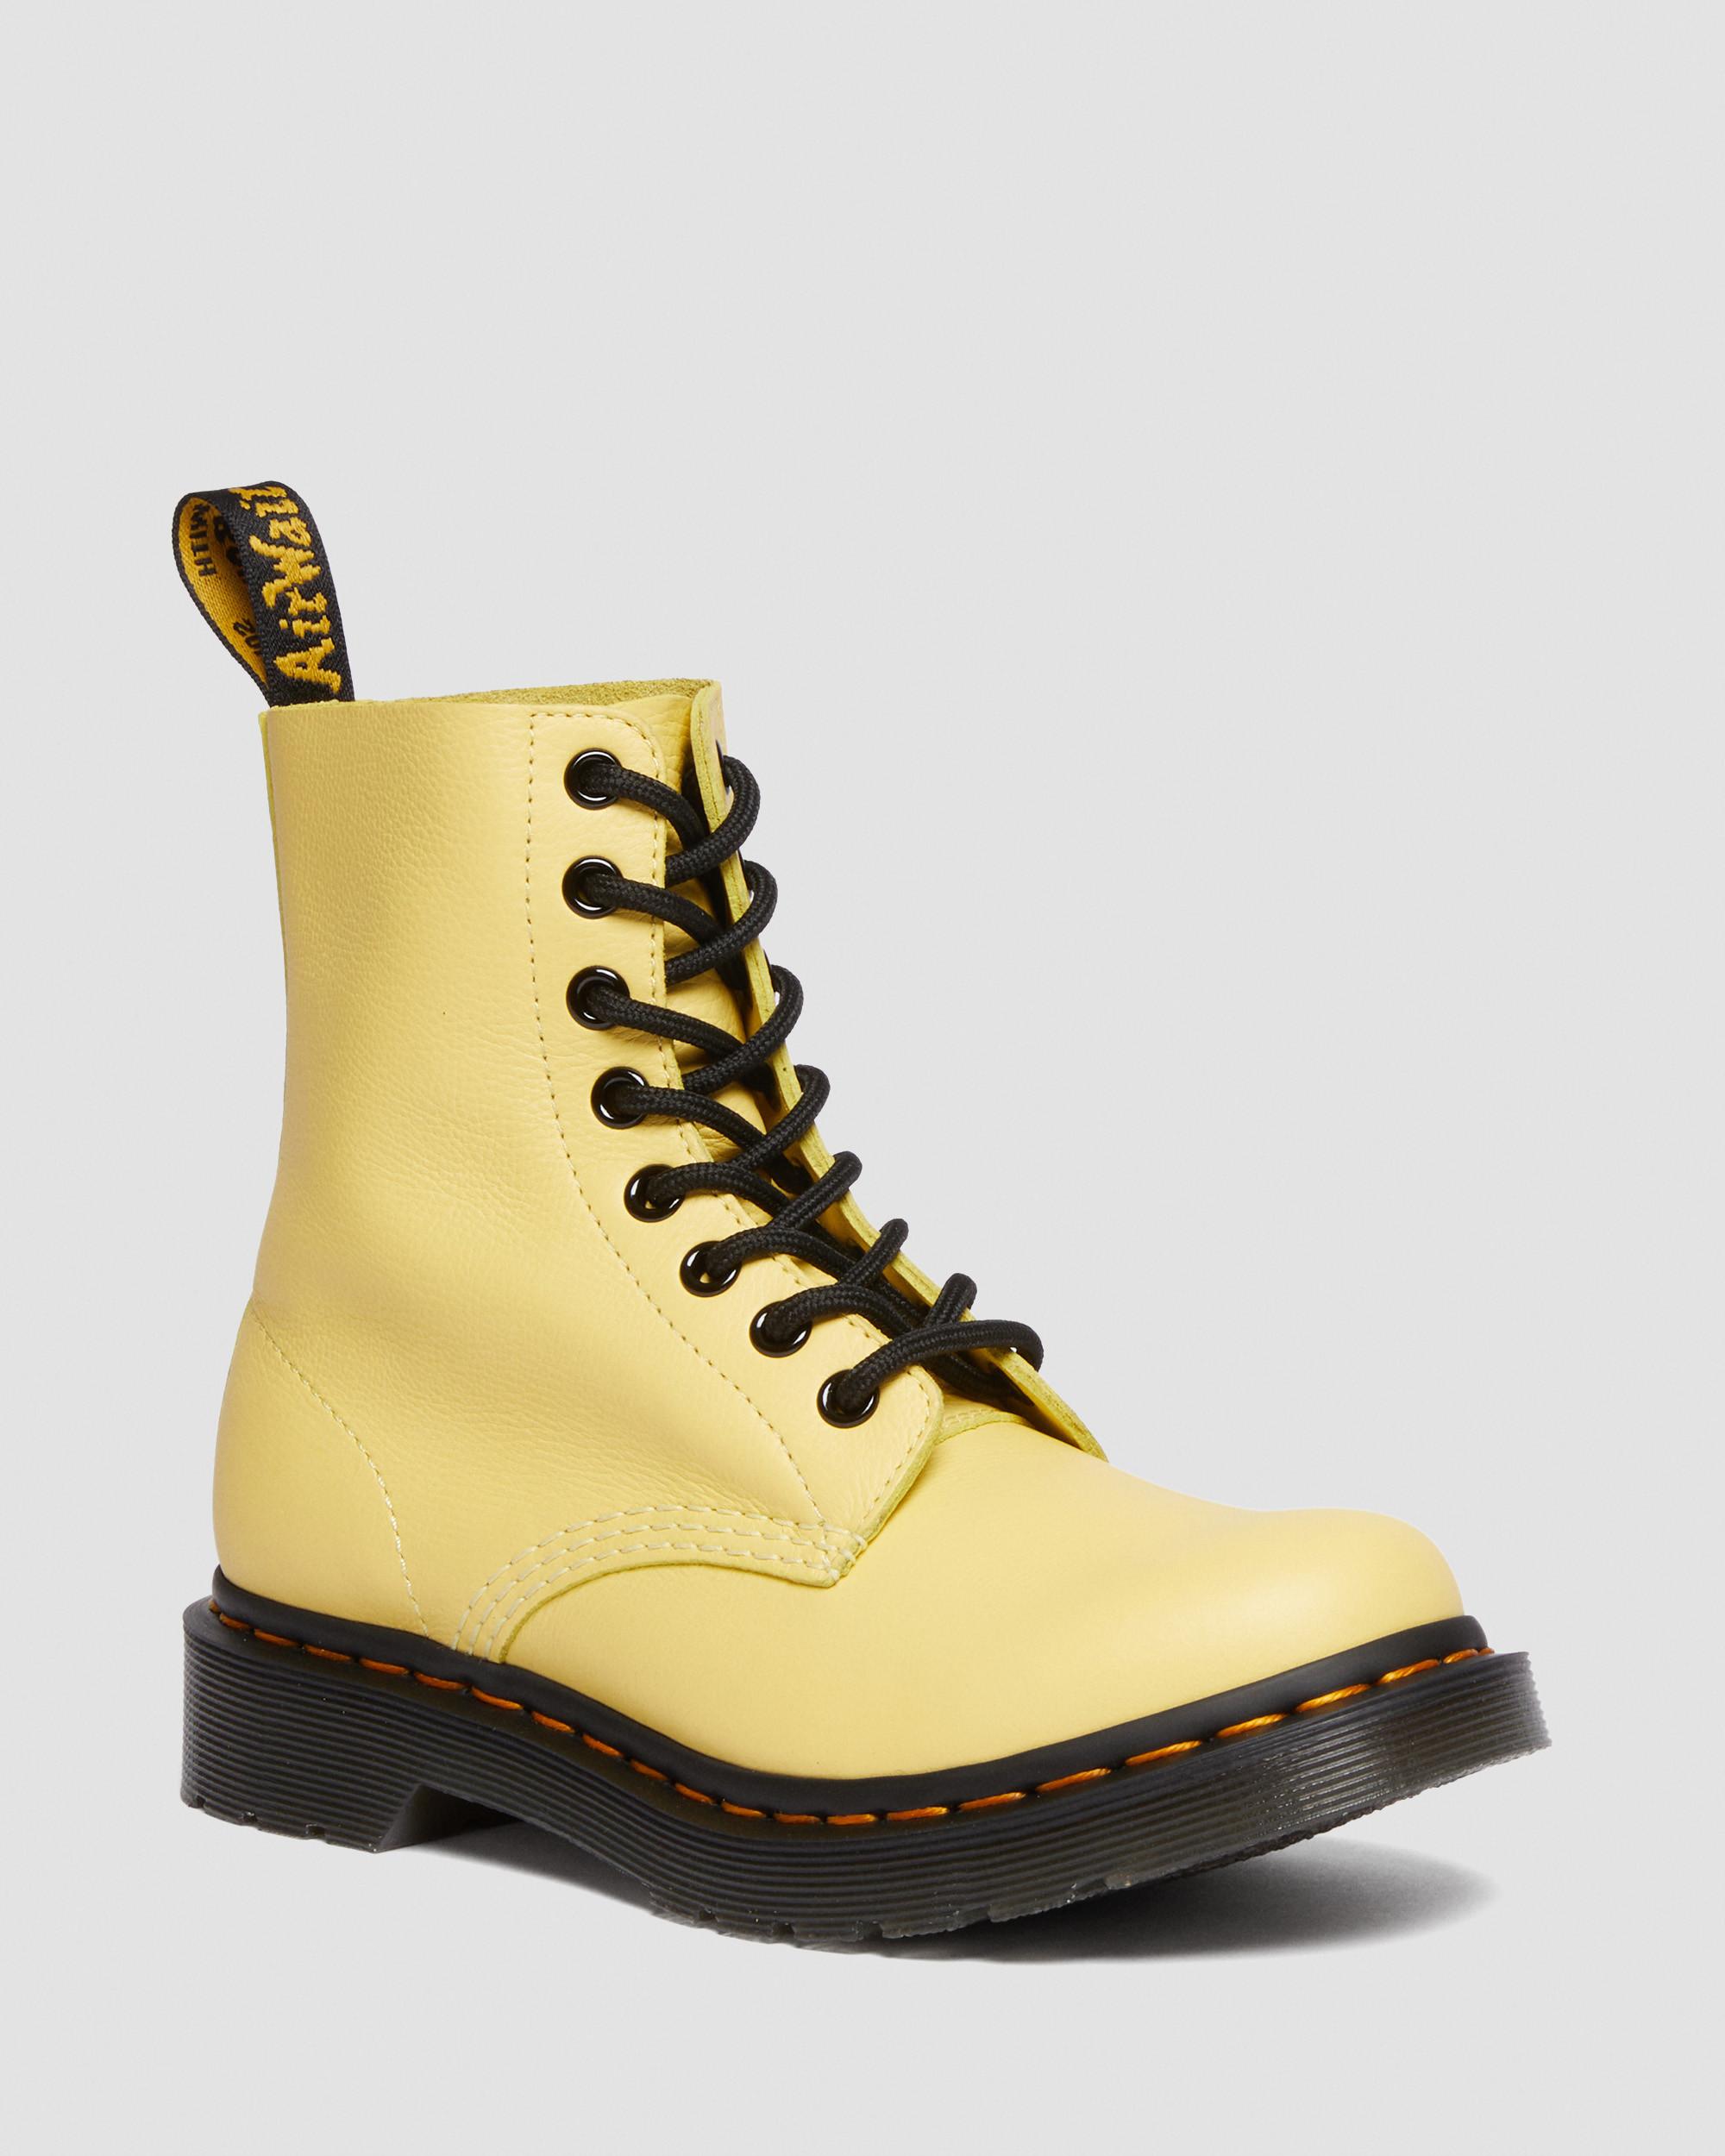 Dr. Martens' 1460 Women's Pascal Black Eyelet Lace Up Boots In Lemon Yellow